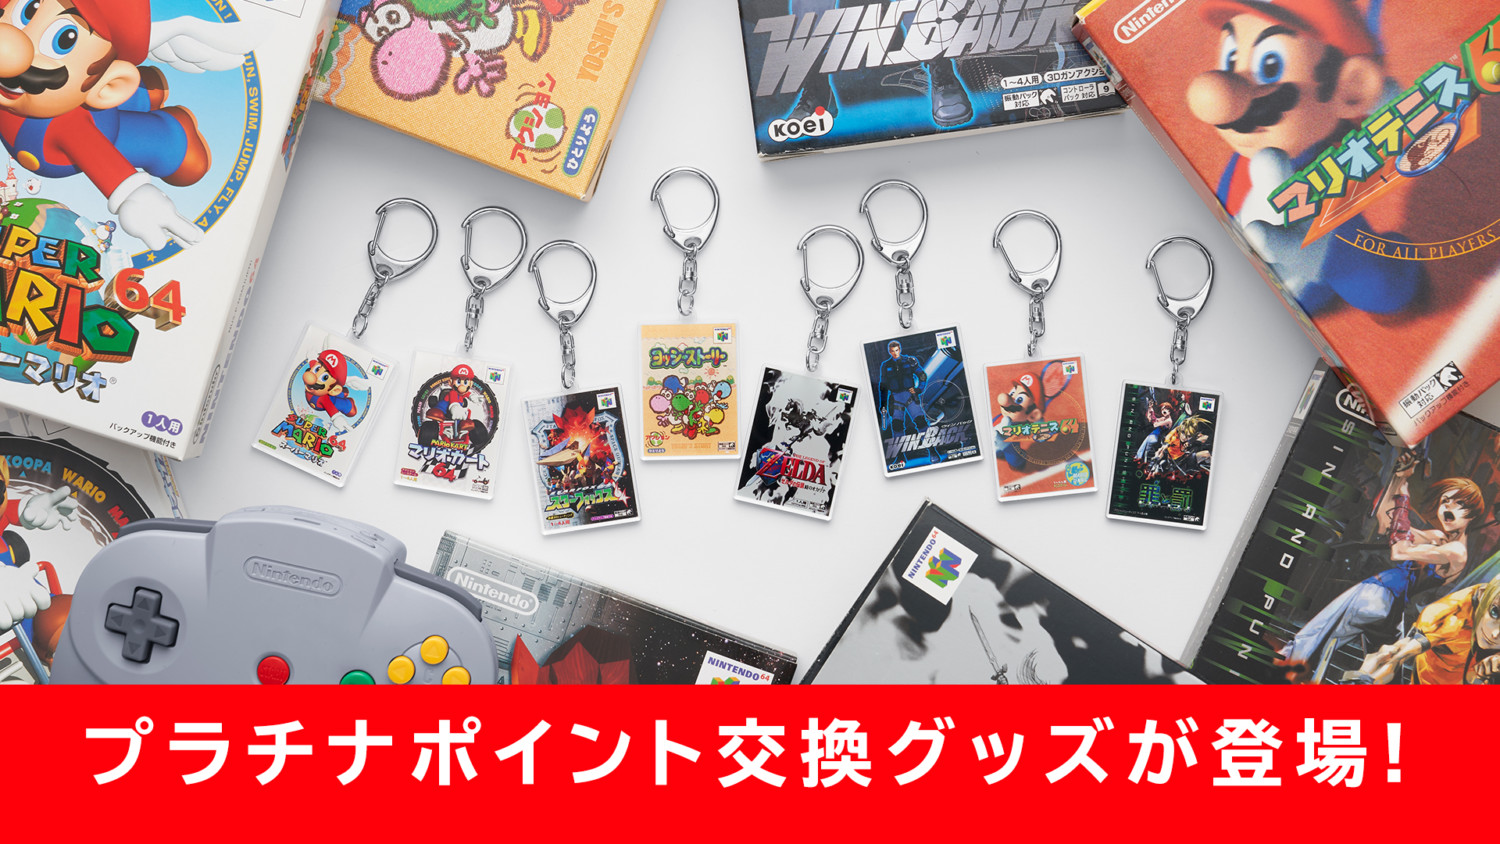 My Nintendo Japan Now Offering Keychains Shaped Like Miniature Nintendo 64  Packages – NintendoSoup